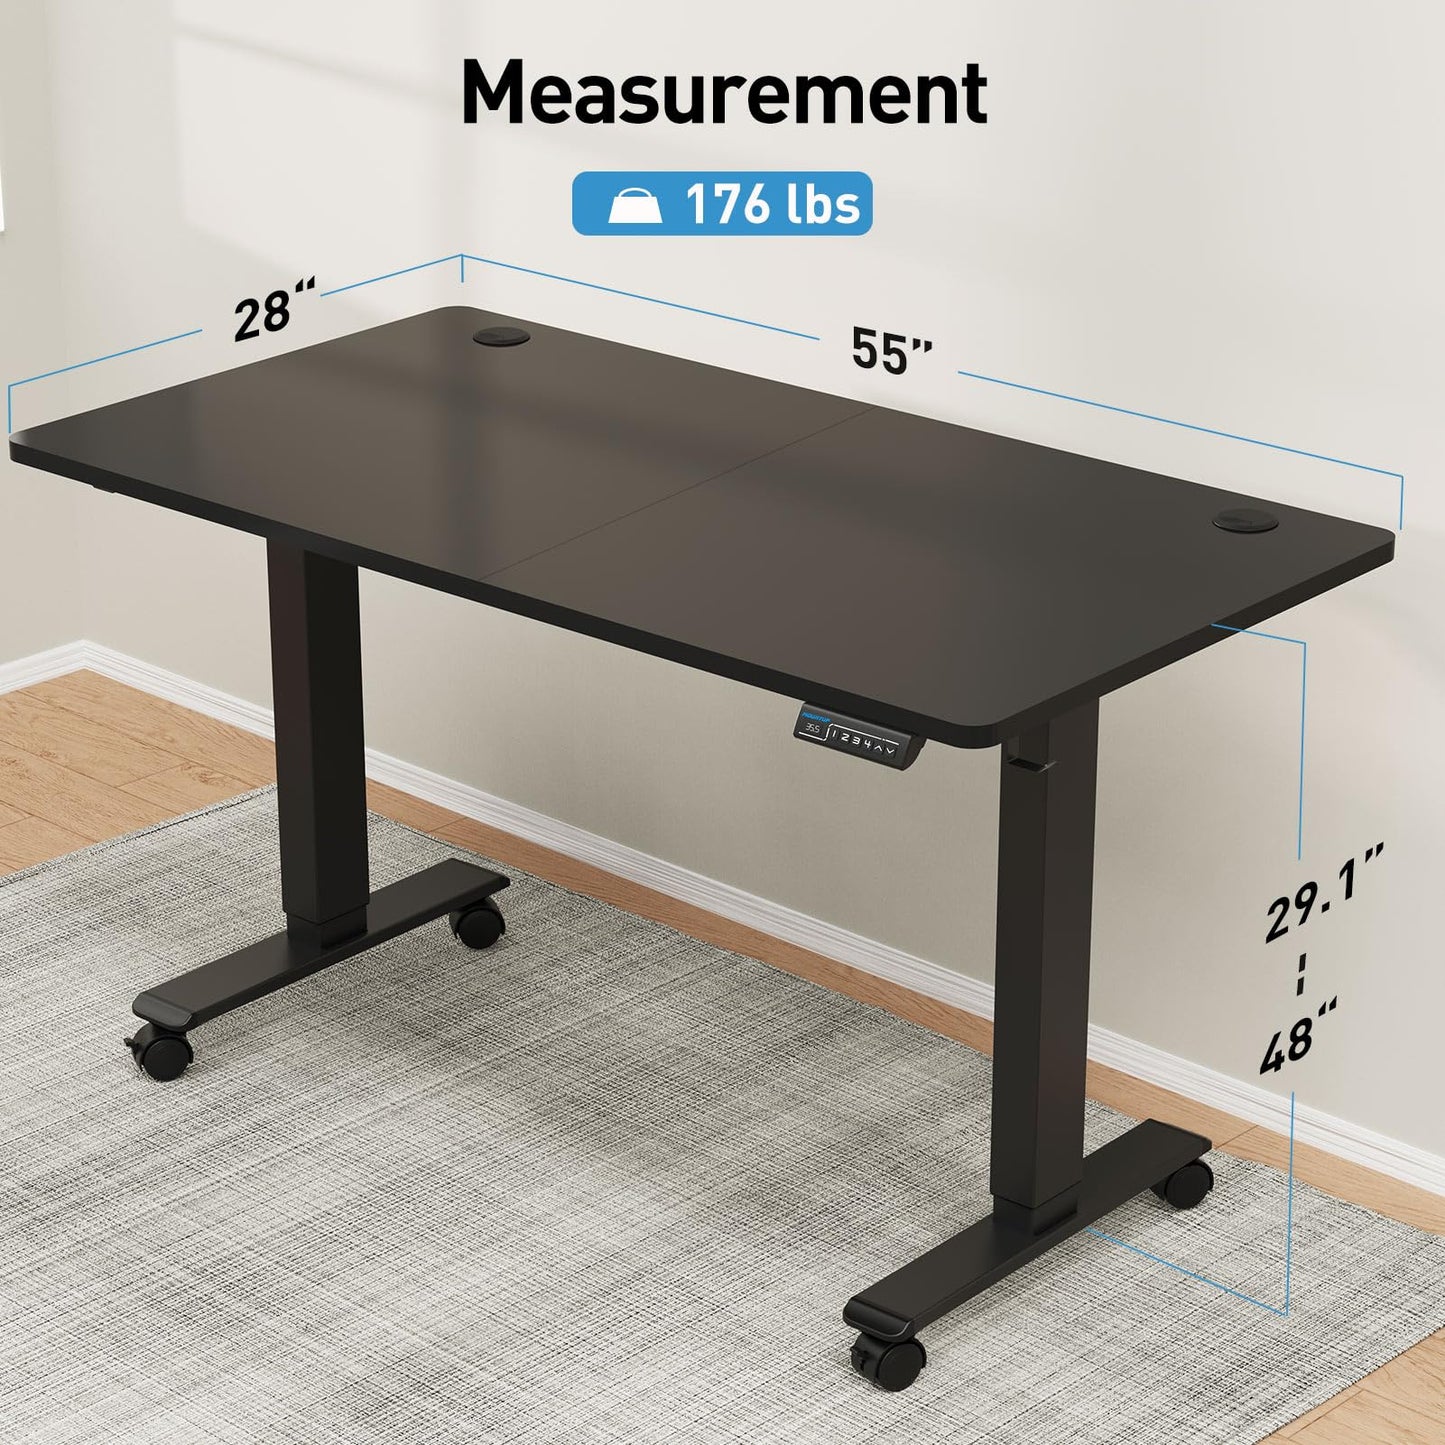 MOUNTUP 55x28 Inches Electric Height Adjustable Standing Desk, Sit Stand Desk with Memory Controller, Ergonomic Stand Up Desk for Home Office with